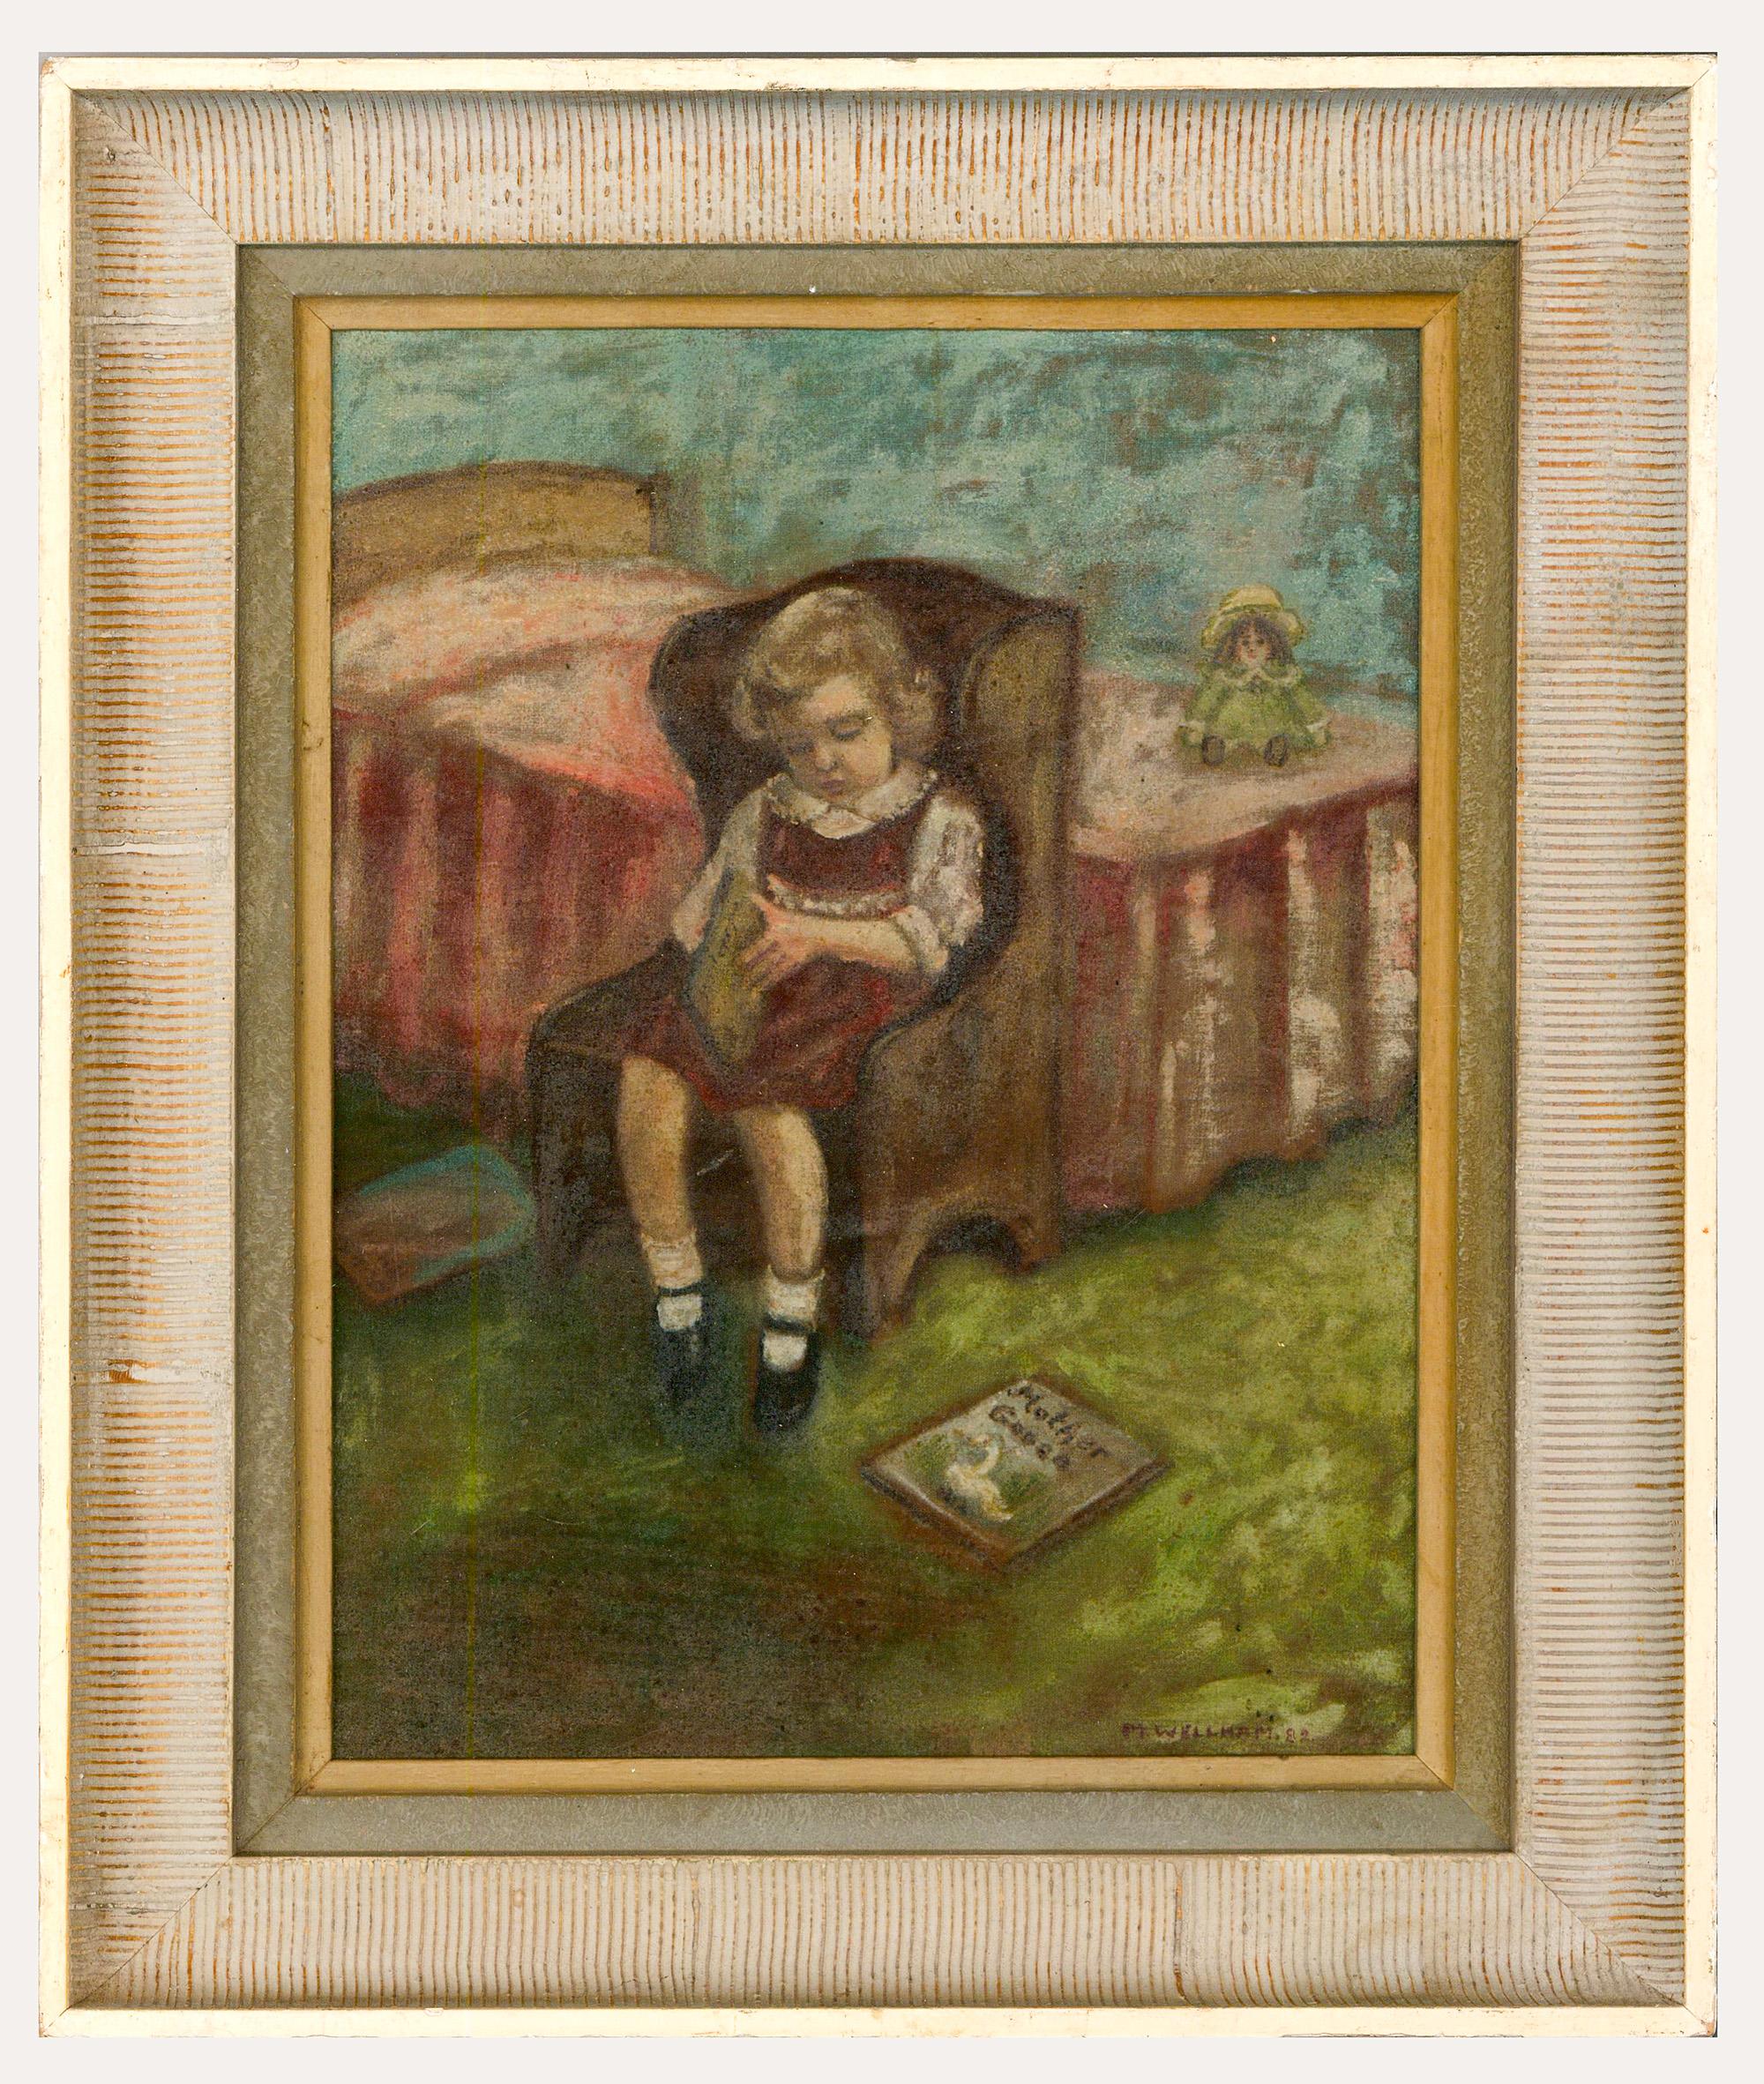 Unknown Portrait Painting - M. Wellham - Framed 20th Century Oil, A Story Before Bed